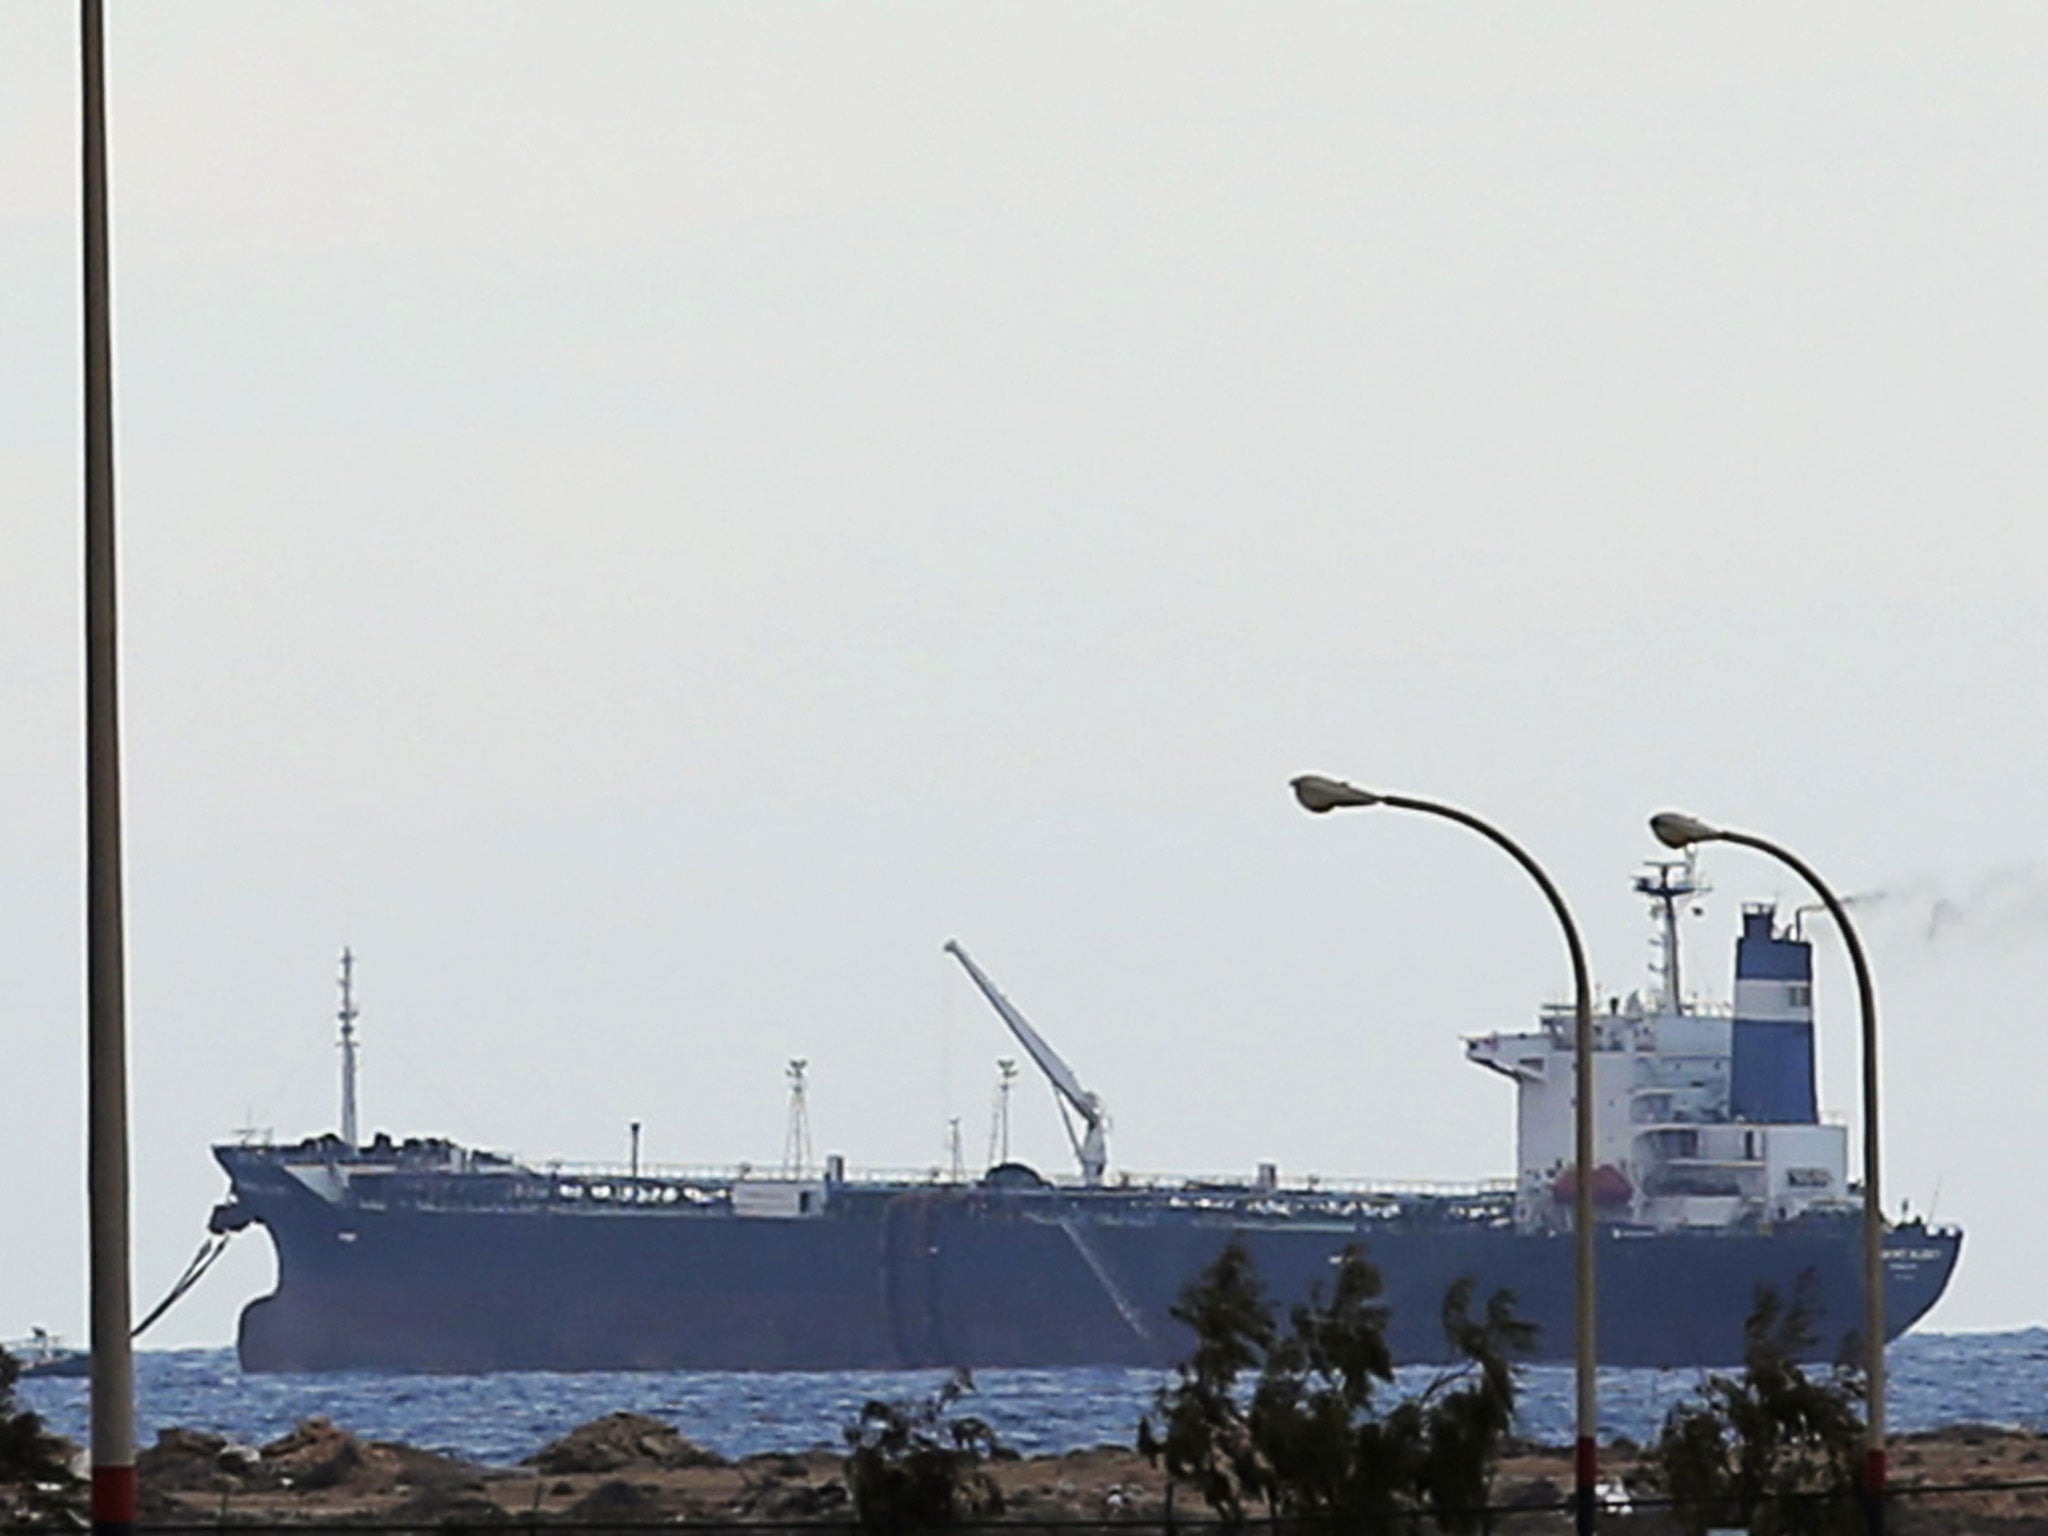 The North Korean-flagged tanker docked at the Es Sider export terminal in Ras Lanuf on 8 March, 2014